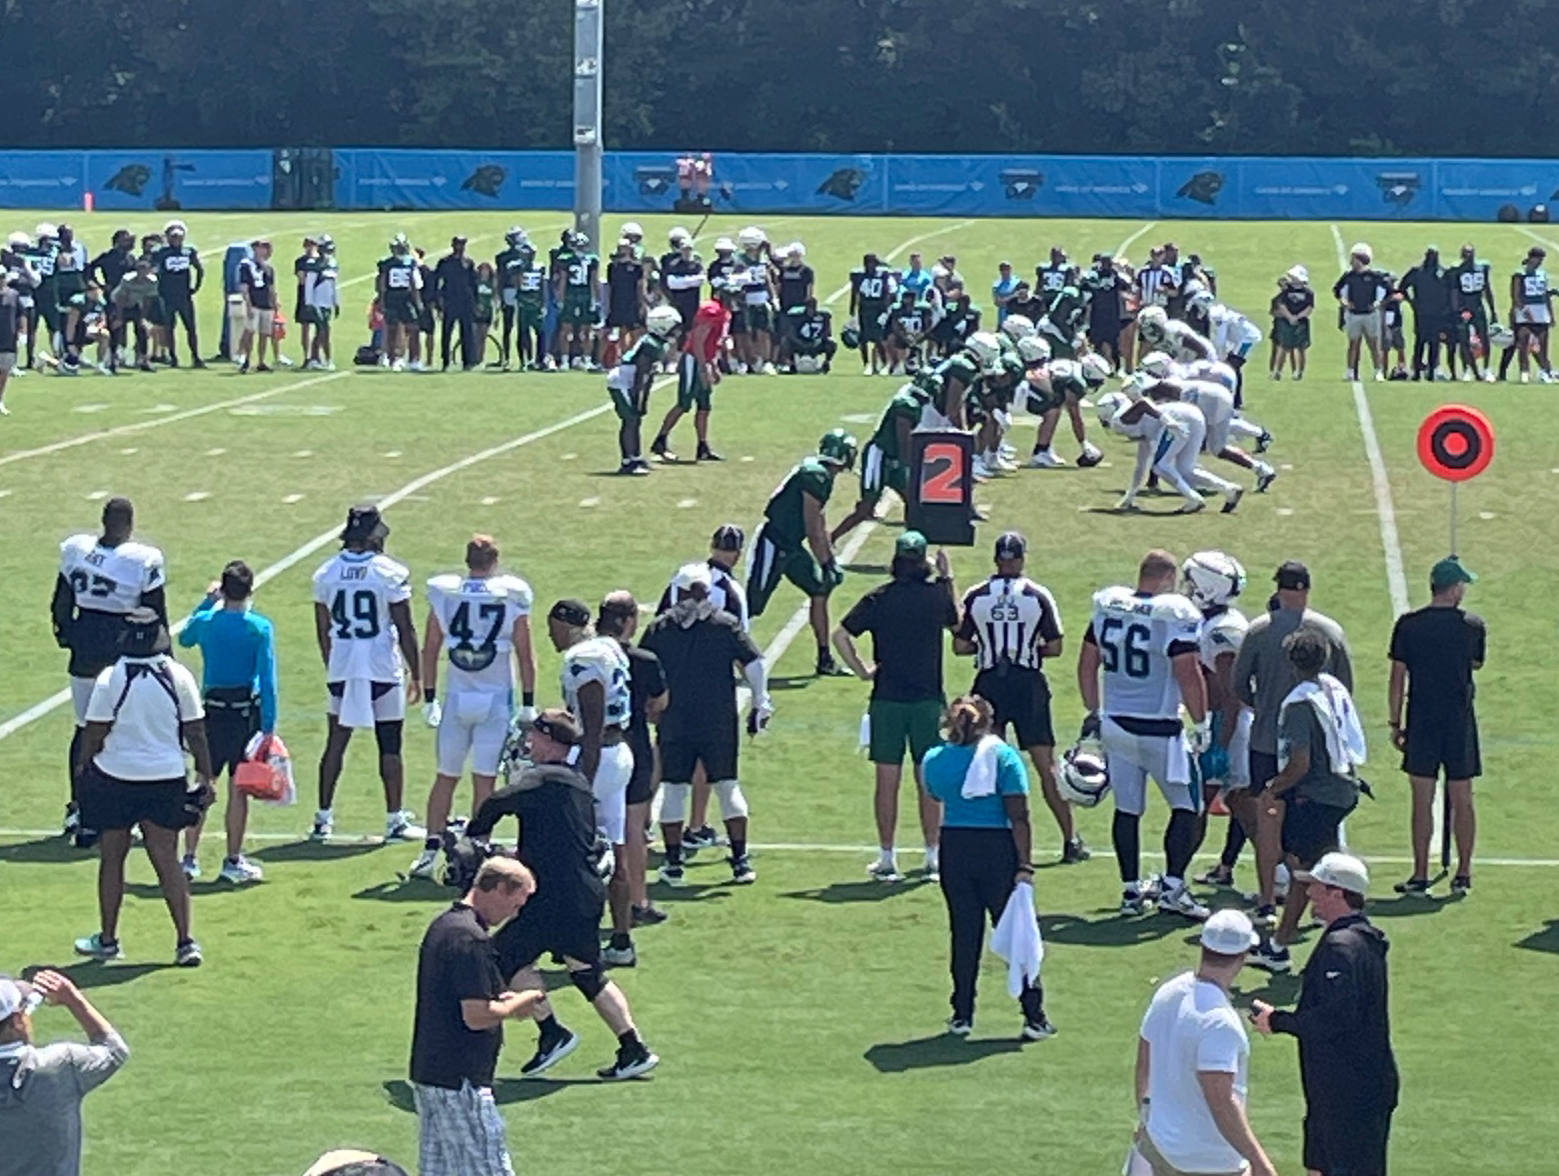 Waiting eagerly for the snap, the Jets and Panthers get set to compete in the practice. 